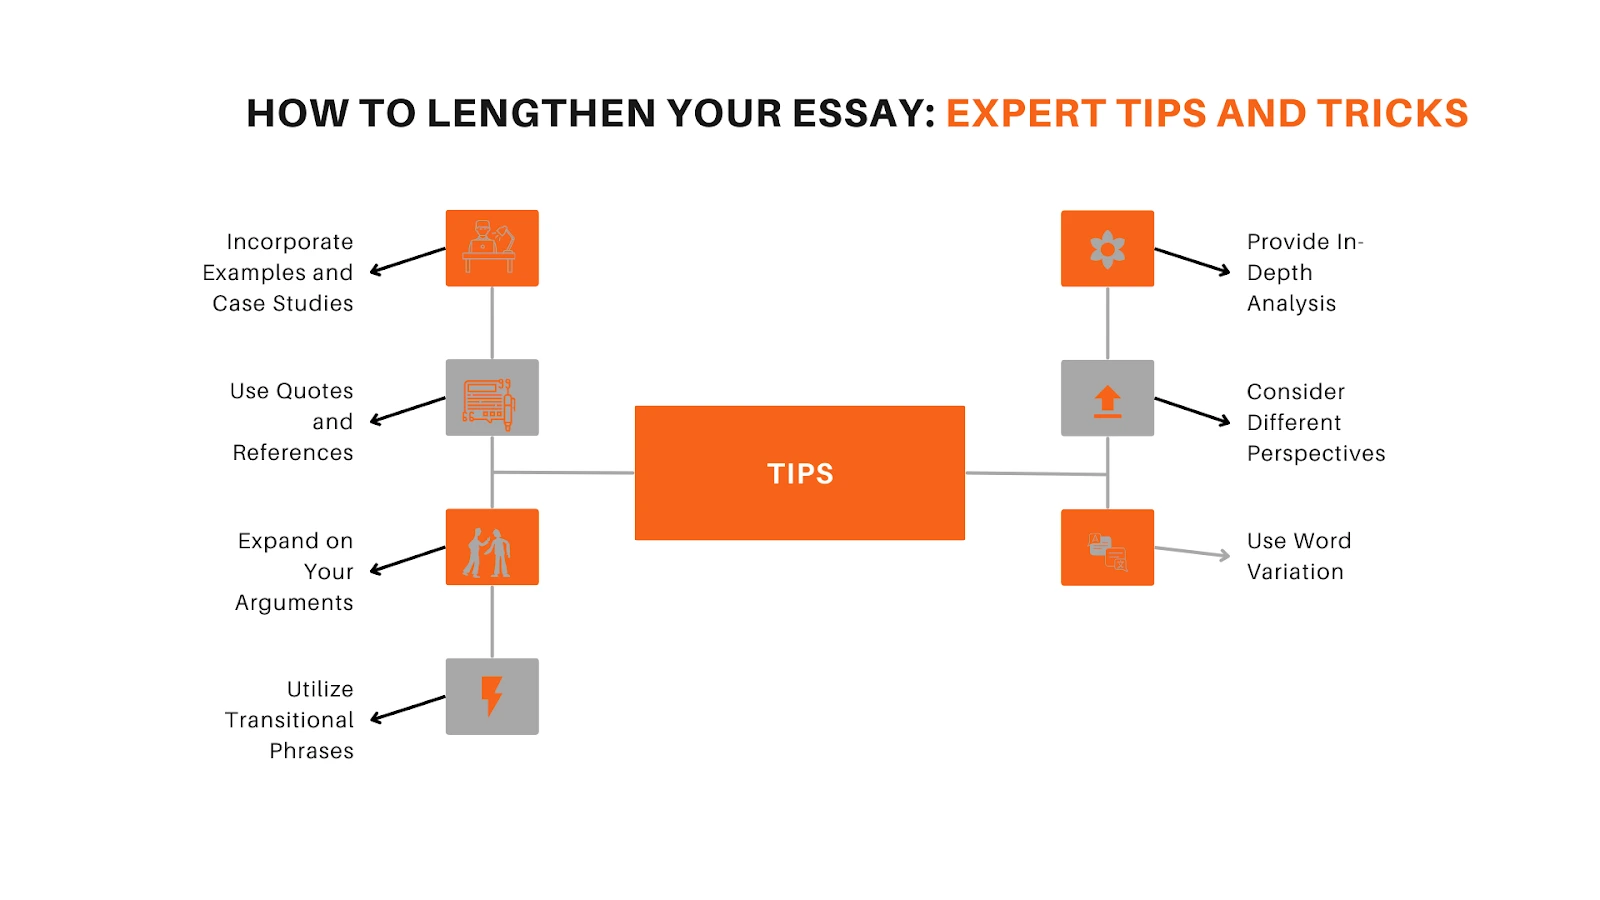 Image About How To Lengthen Your Essay